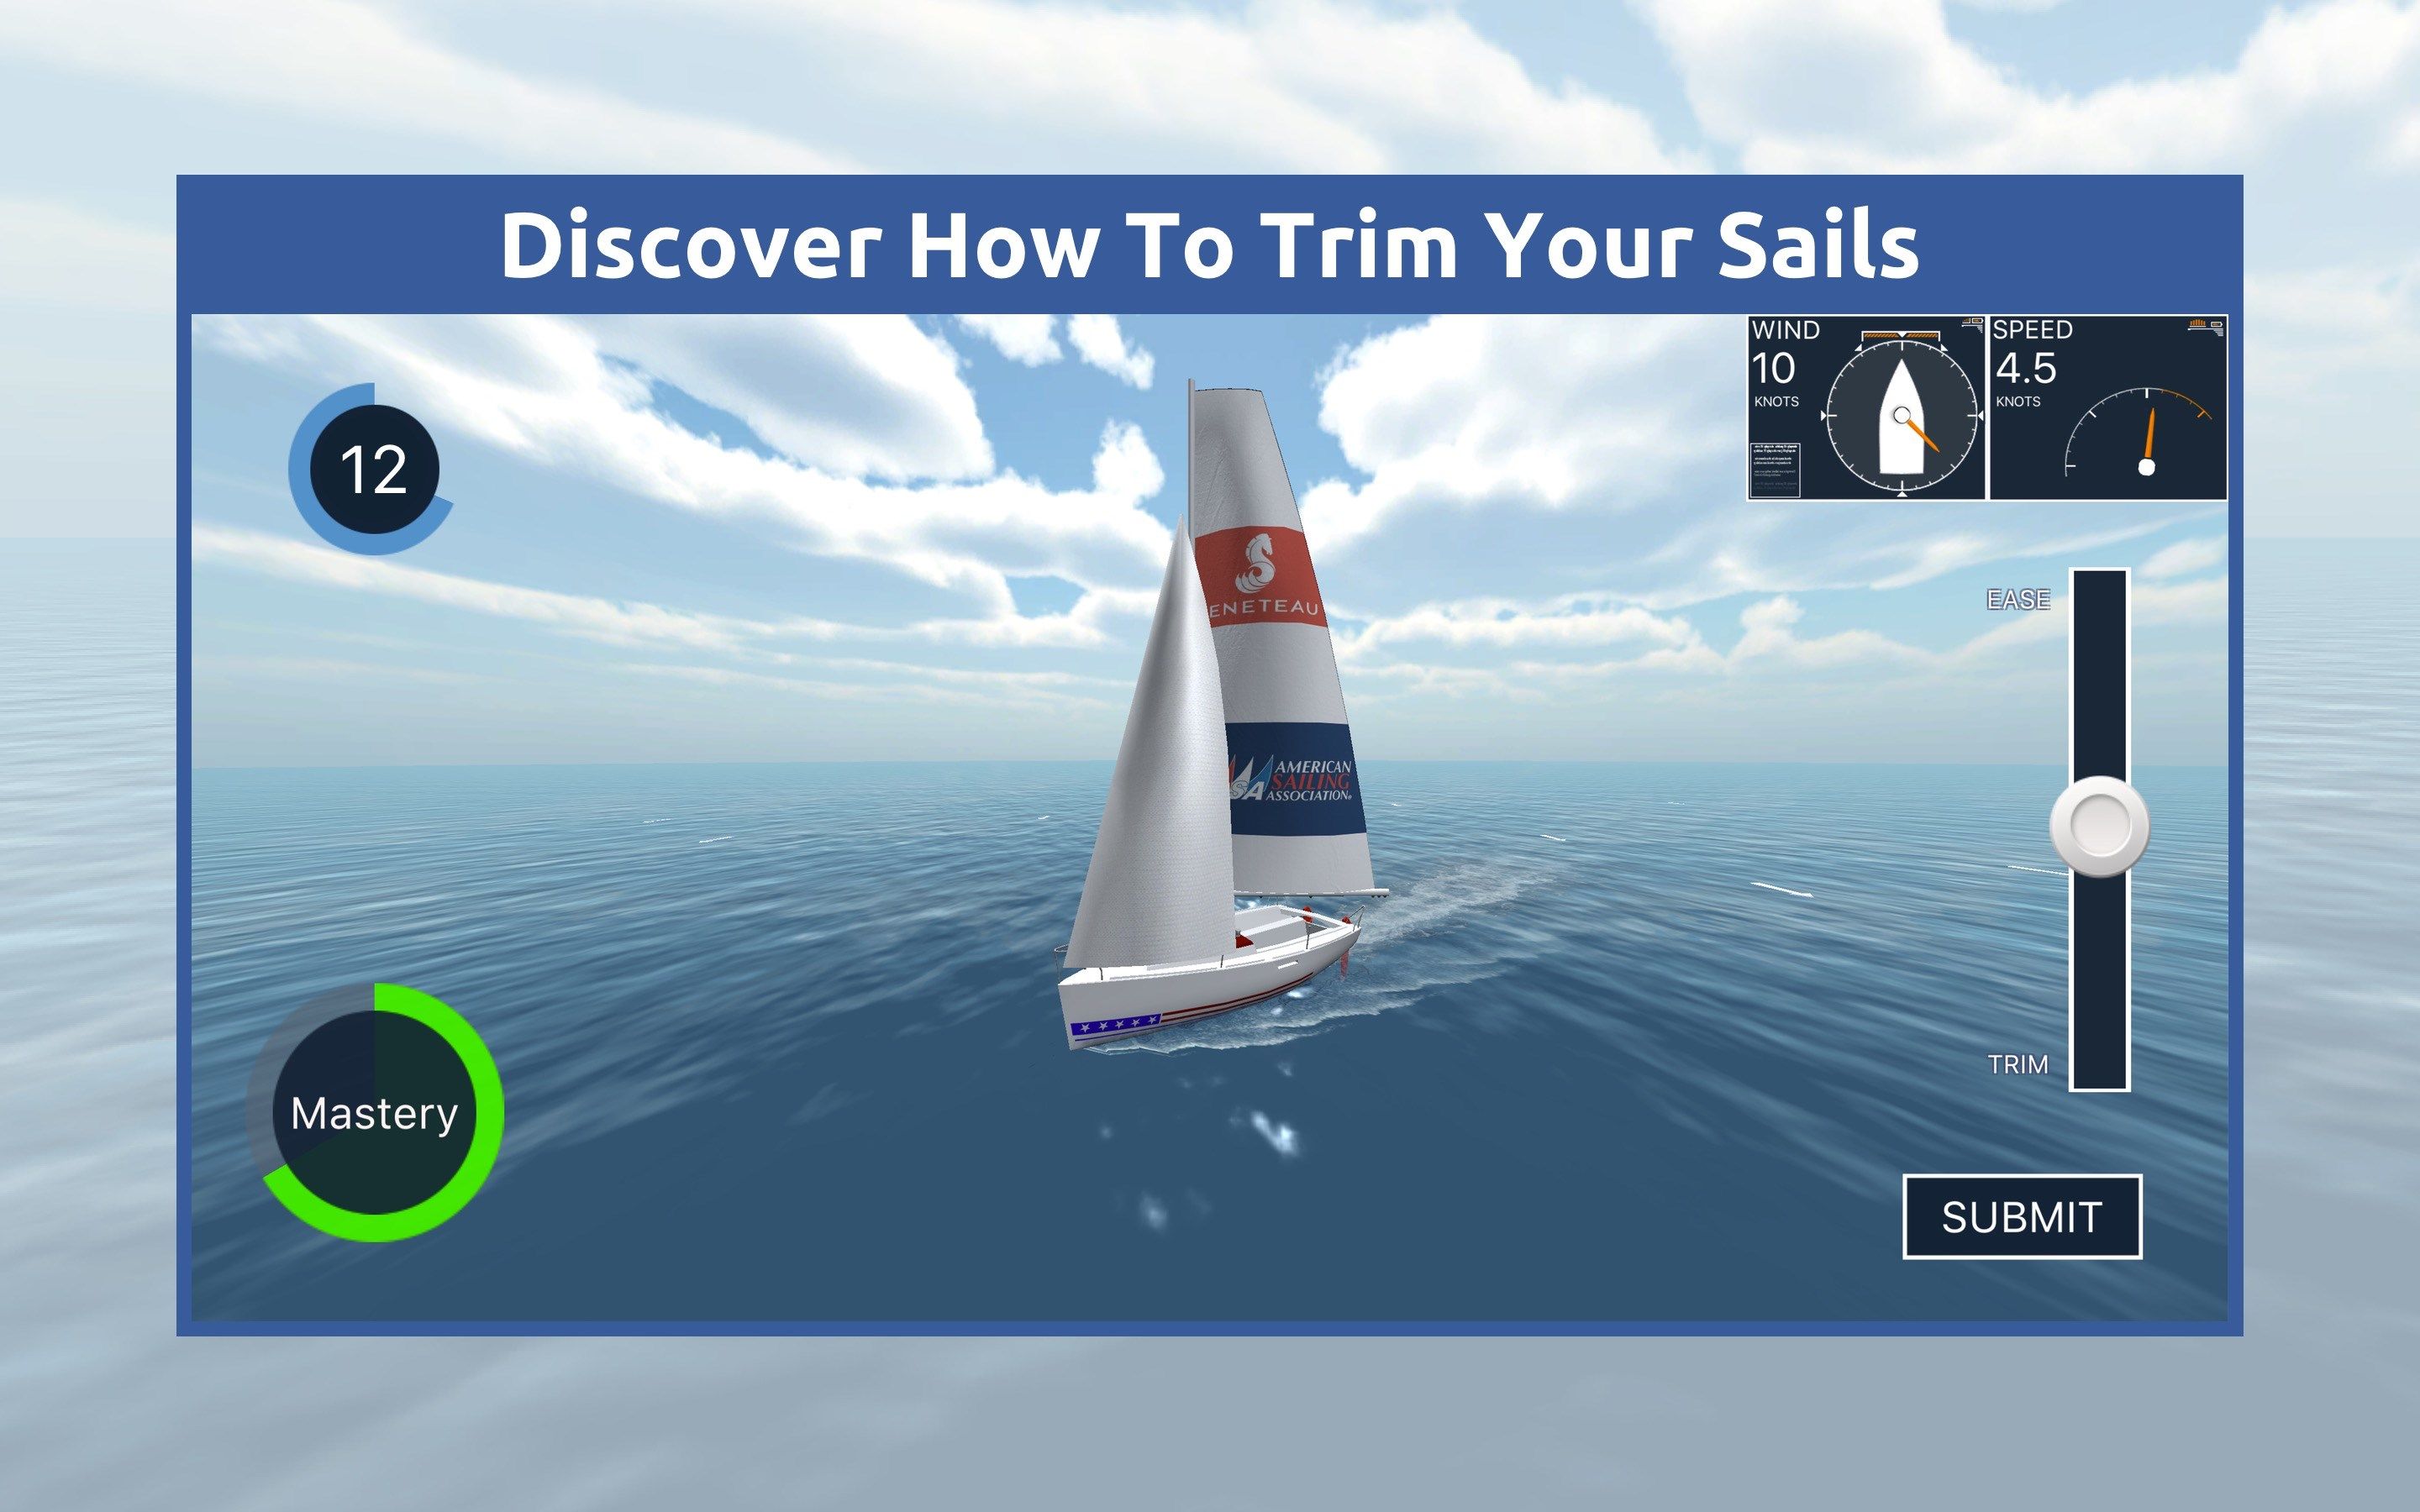 Every time the boat’s angle to the wind changes, the sail trim should change too. In this module the player learns how to trim the sail for maximum efficiency on the different points of sail.